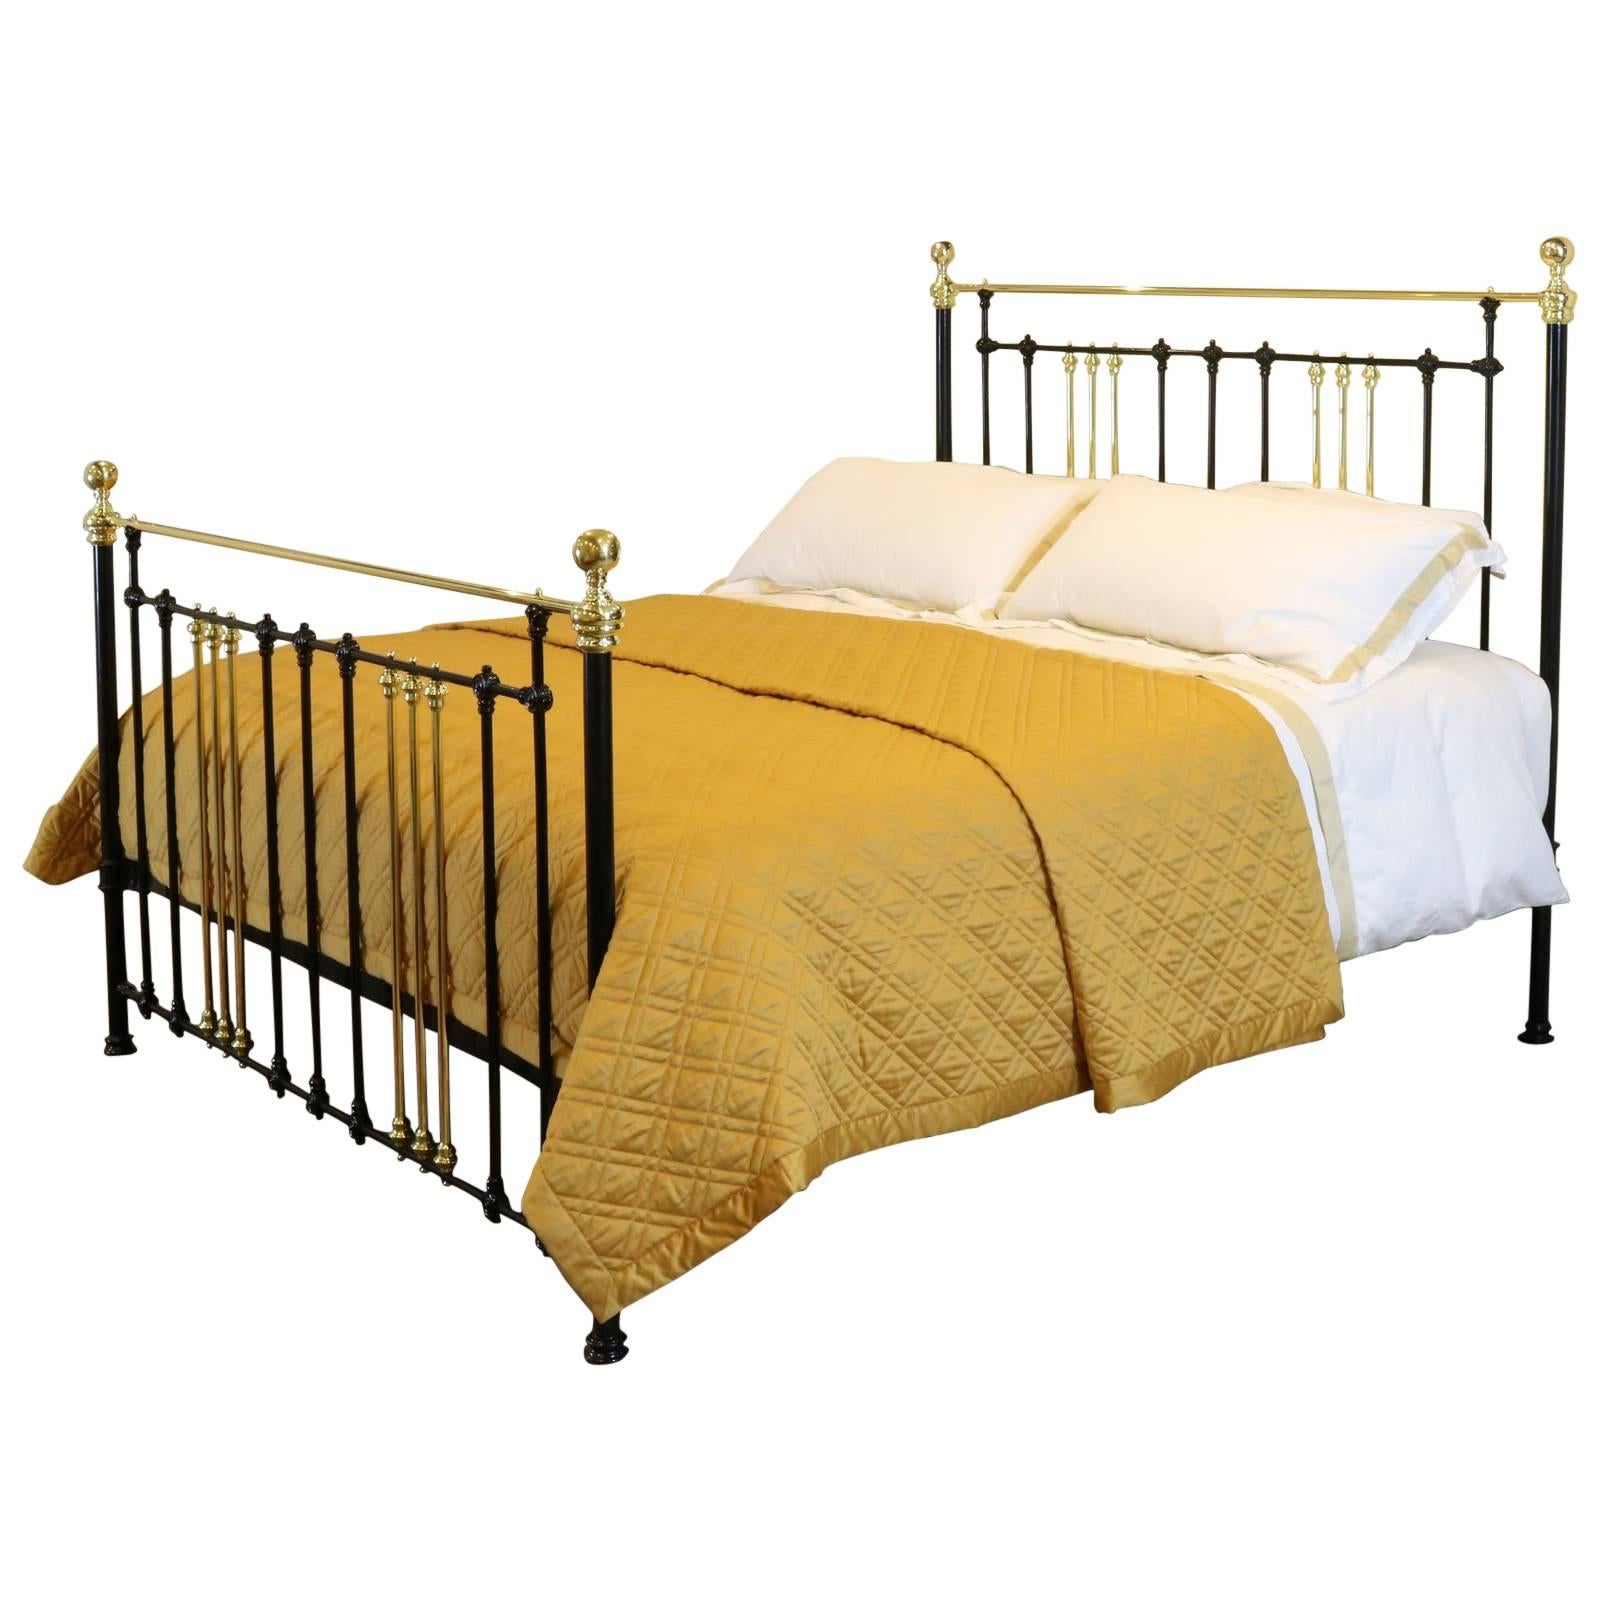 Brass and Cast Iron Bed, MSK22